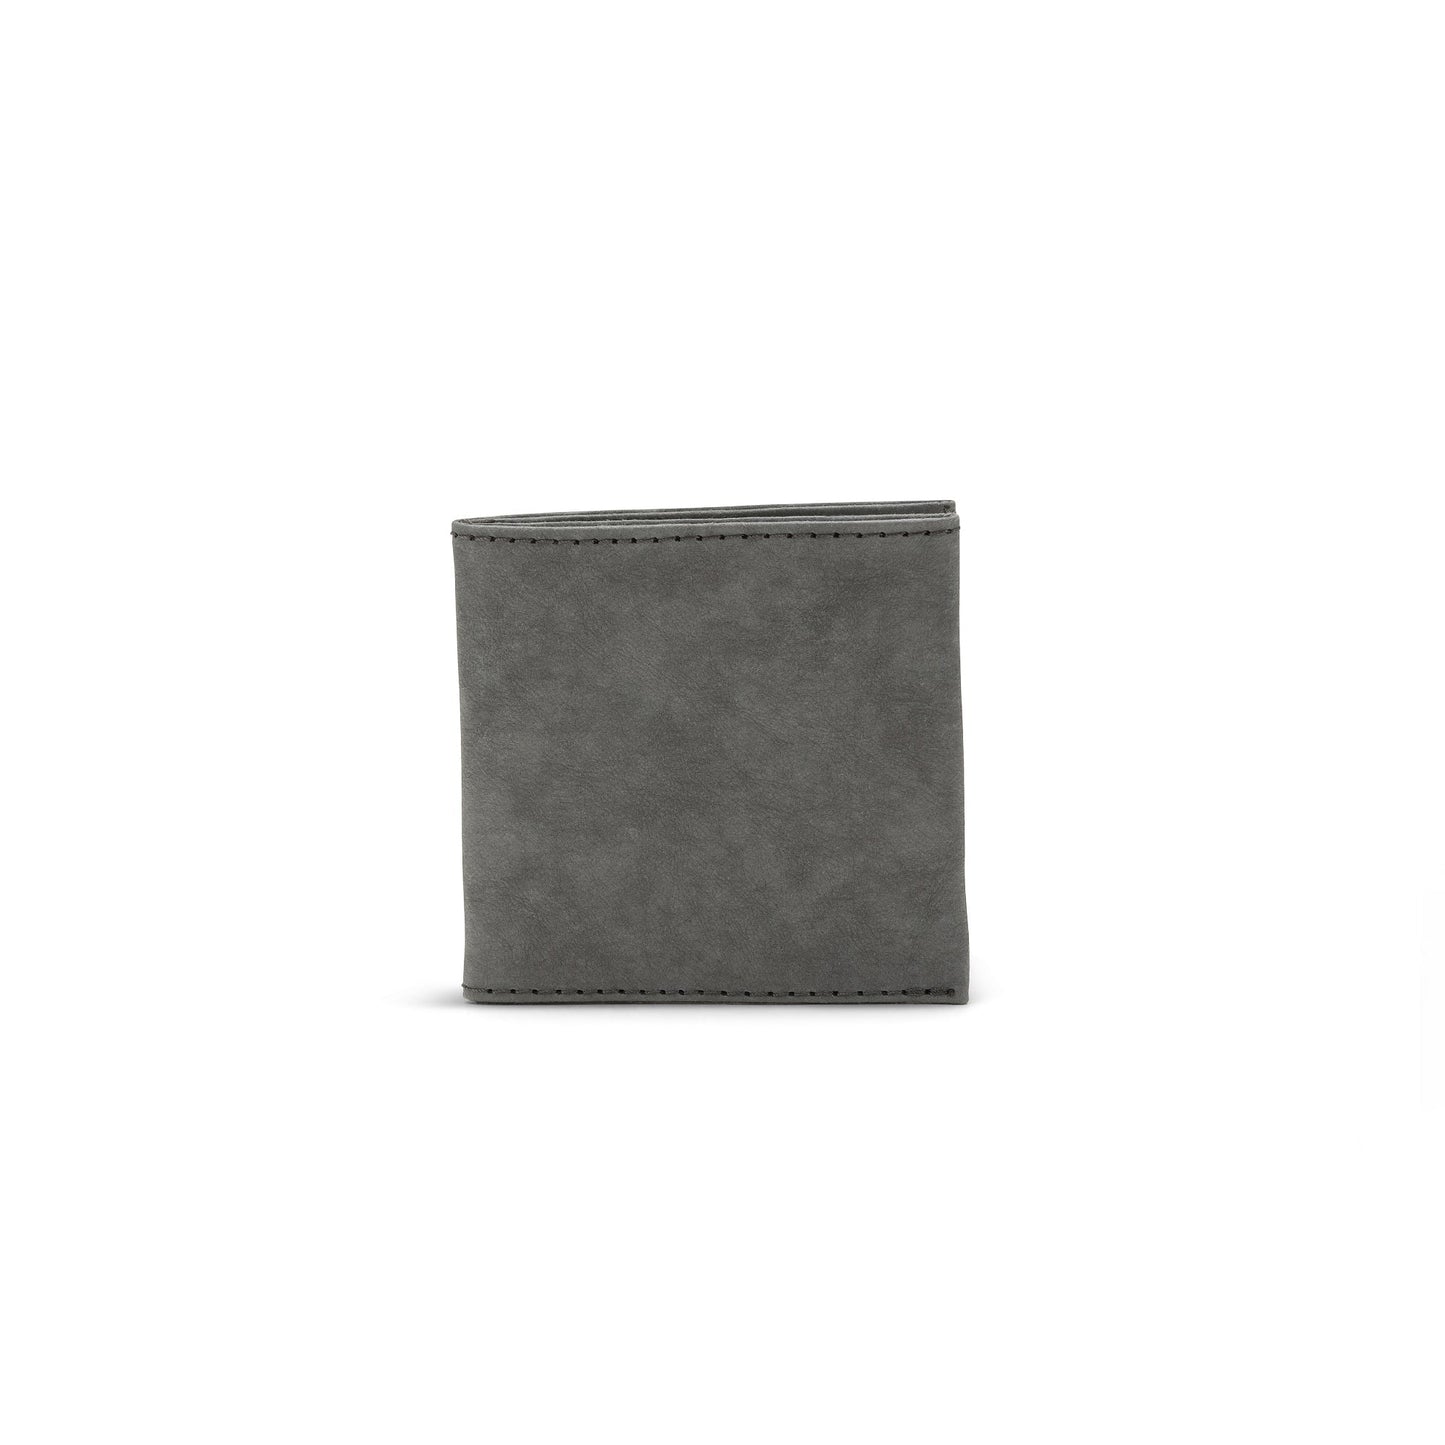 The outside of a small 8 slot washable paper wallet is shown. The wallet is closed and is dark grey.